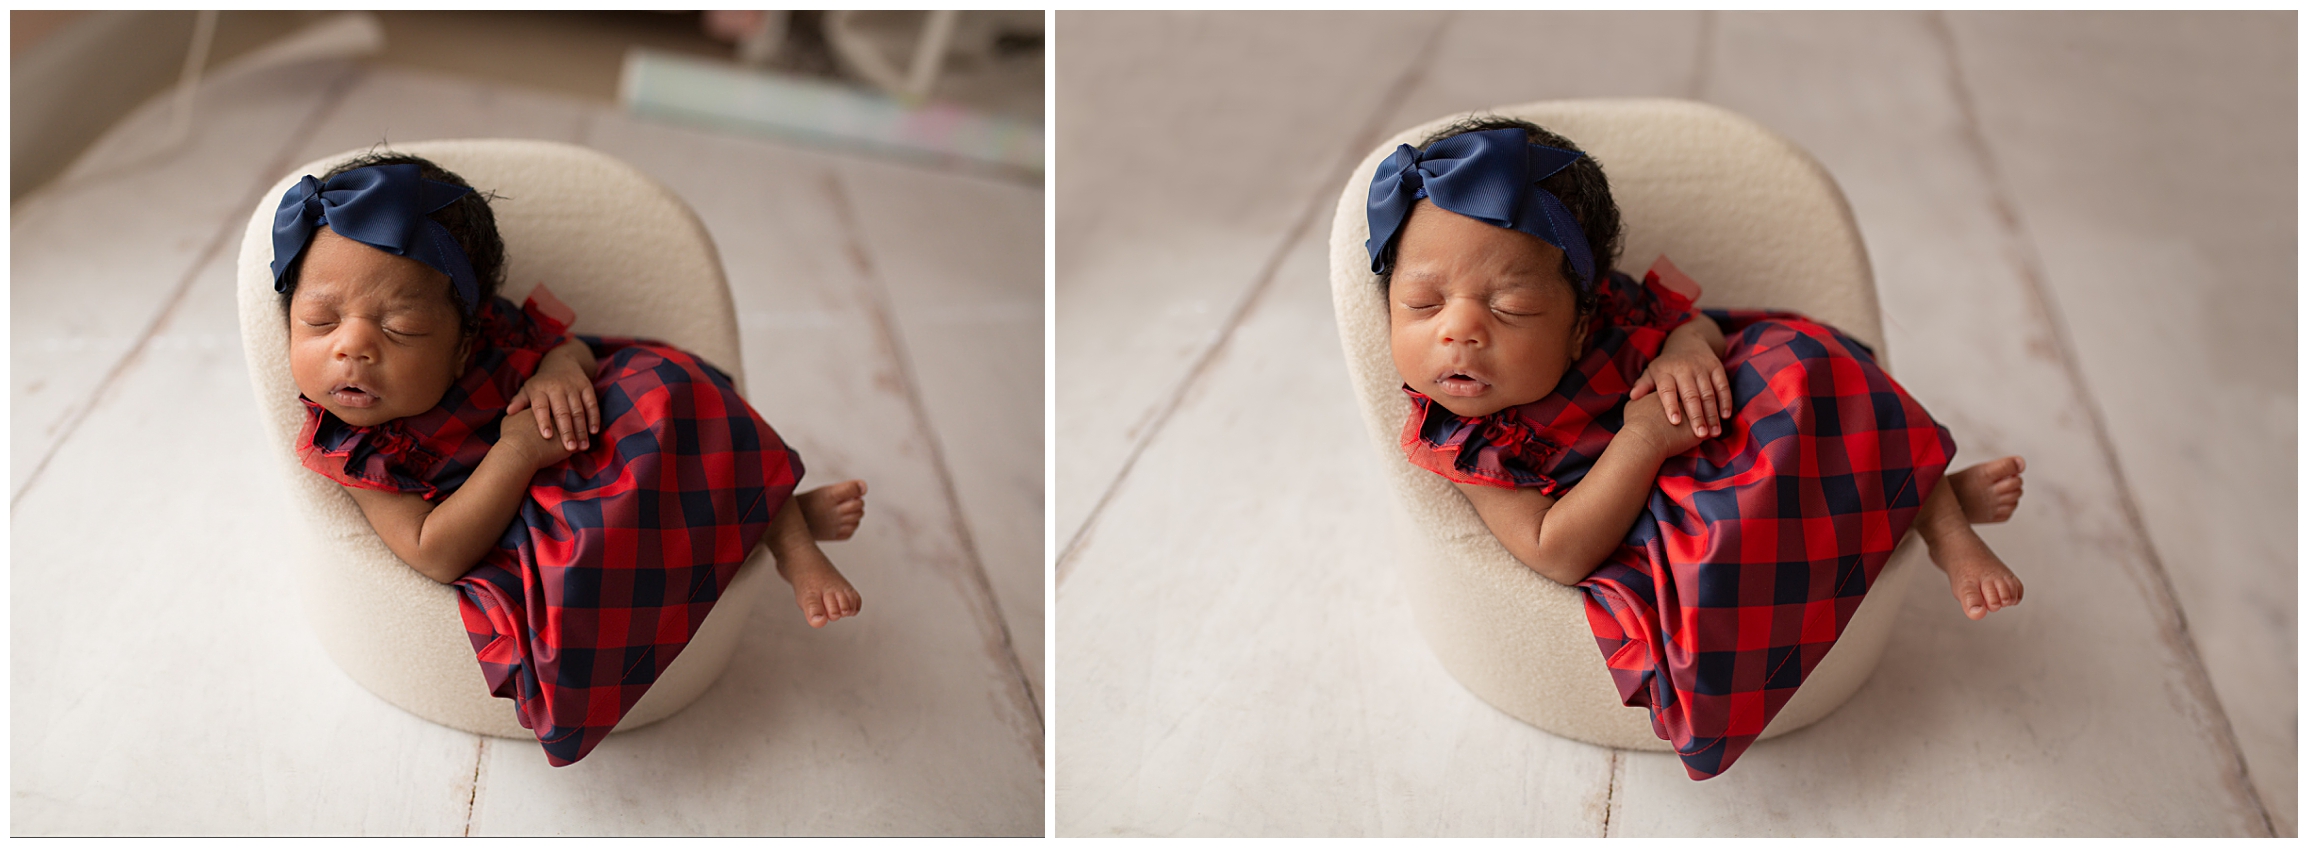 I extended the floor drop that I used for this image because it was a little too short to fit into the image.This baby was a dream! She slept through it all.